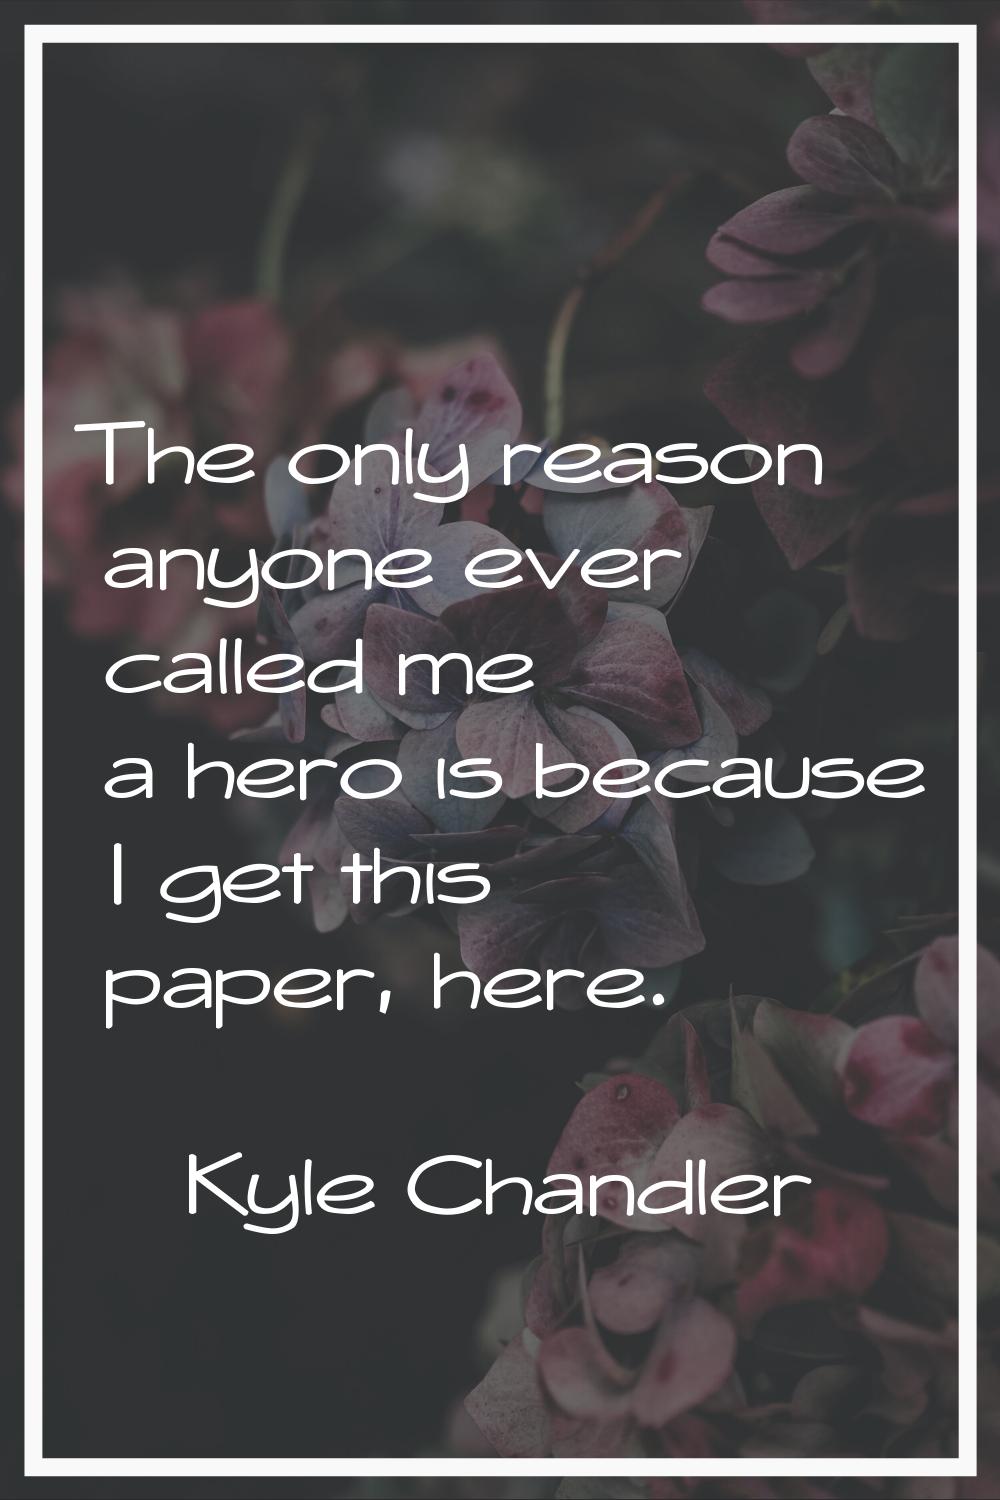 The only reason anyone ever called me a hero is because I get this paper, here.